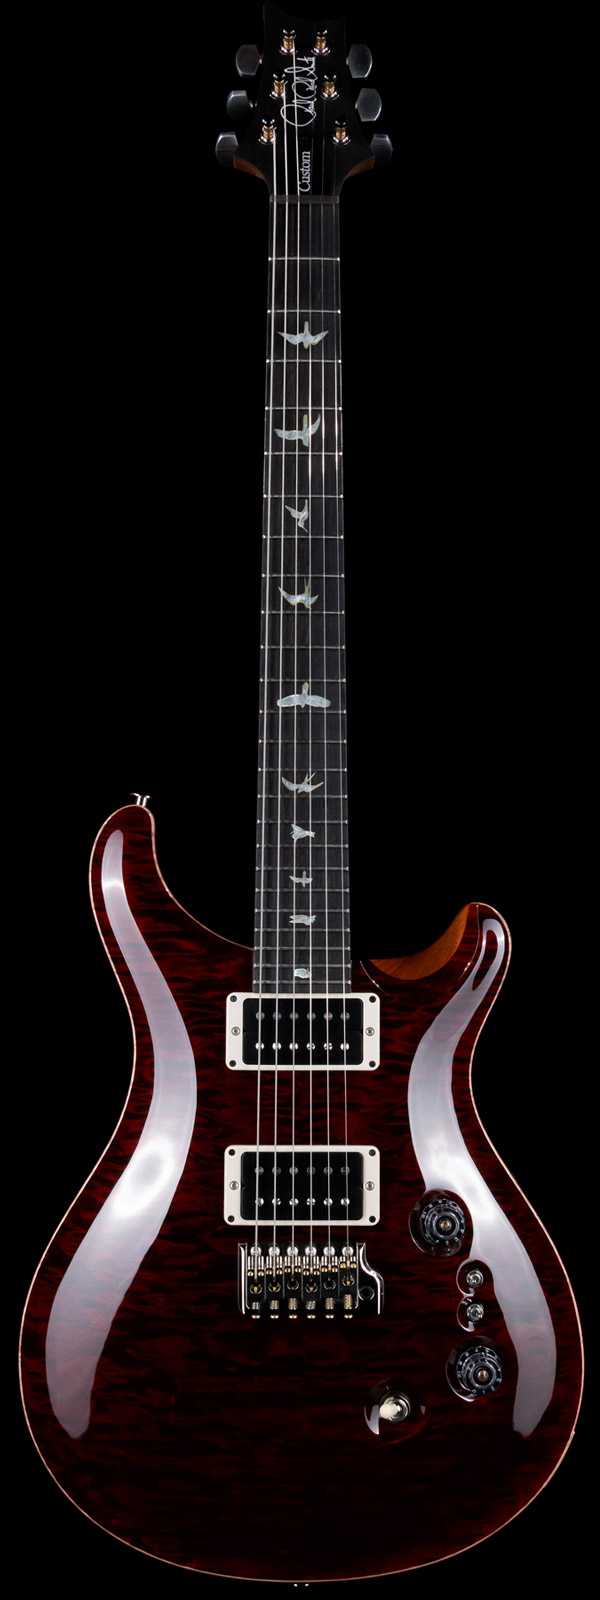 PRS Wood Library Custom 24-08 Quilt 10 Top Flame Neck Ebony Board Red Tiger